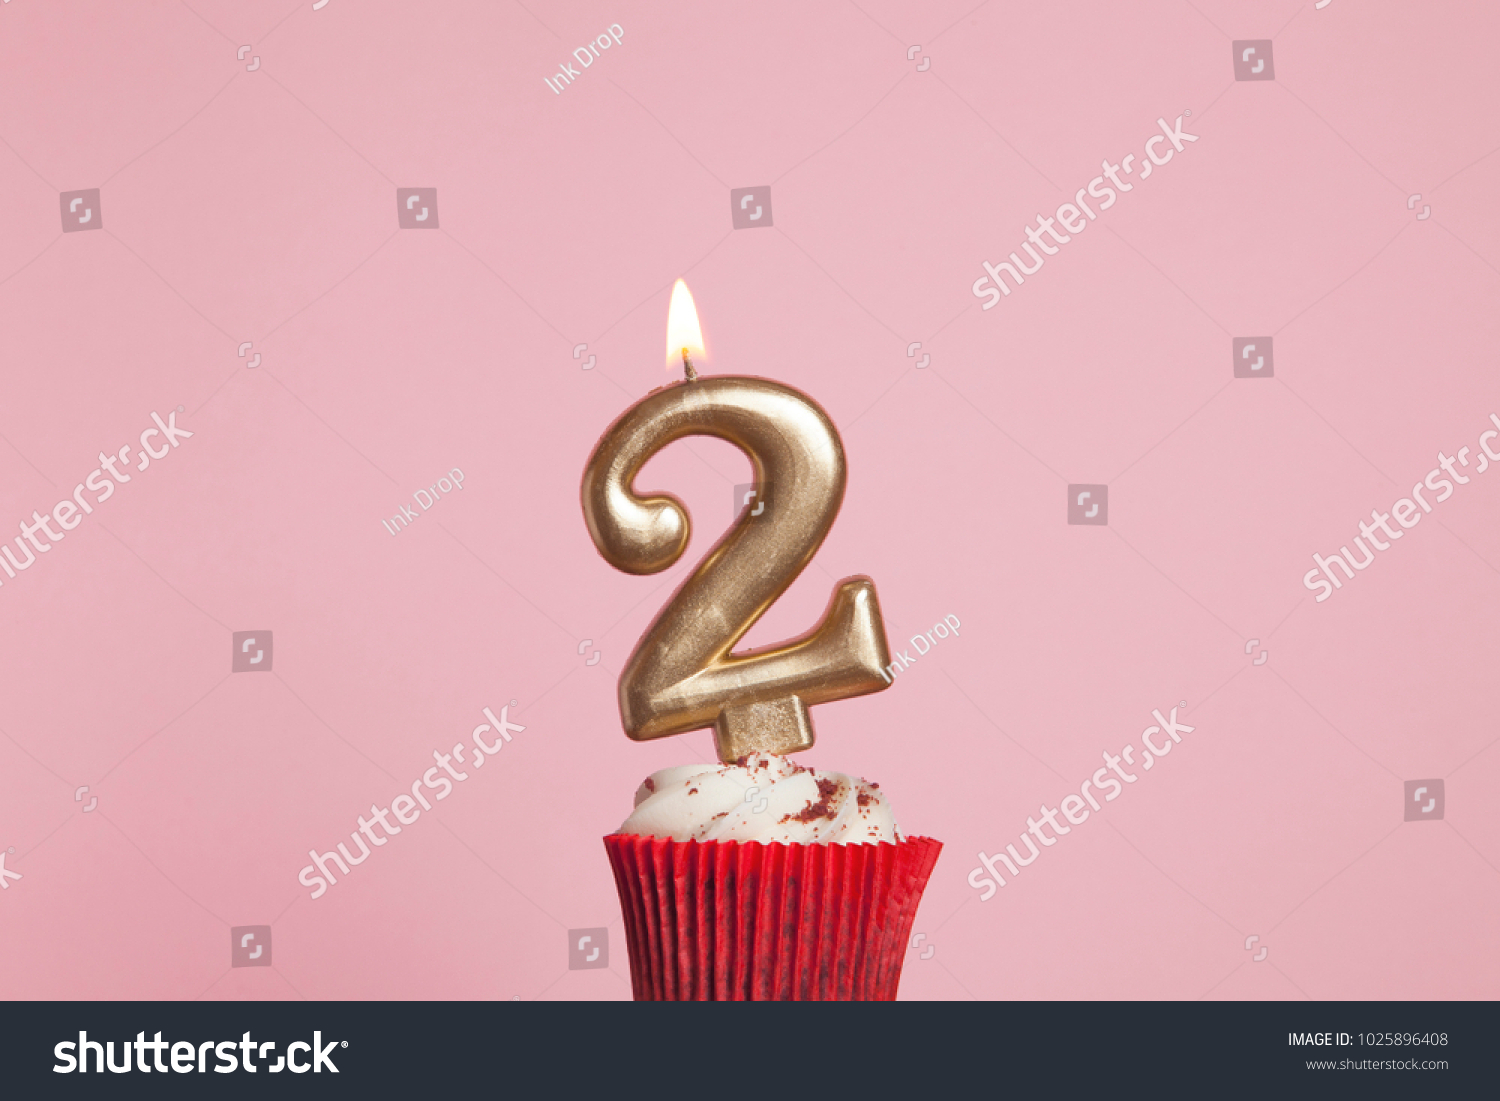 Number 2 gold candle in a cupcake against a pastel pink background